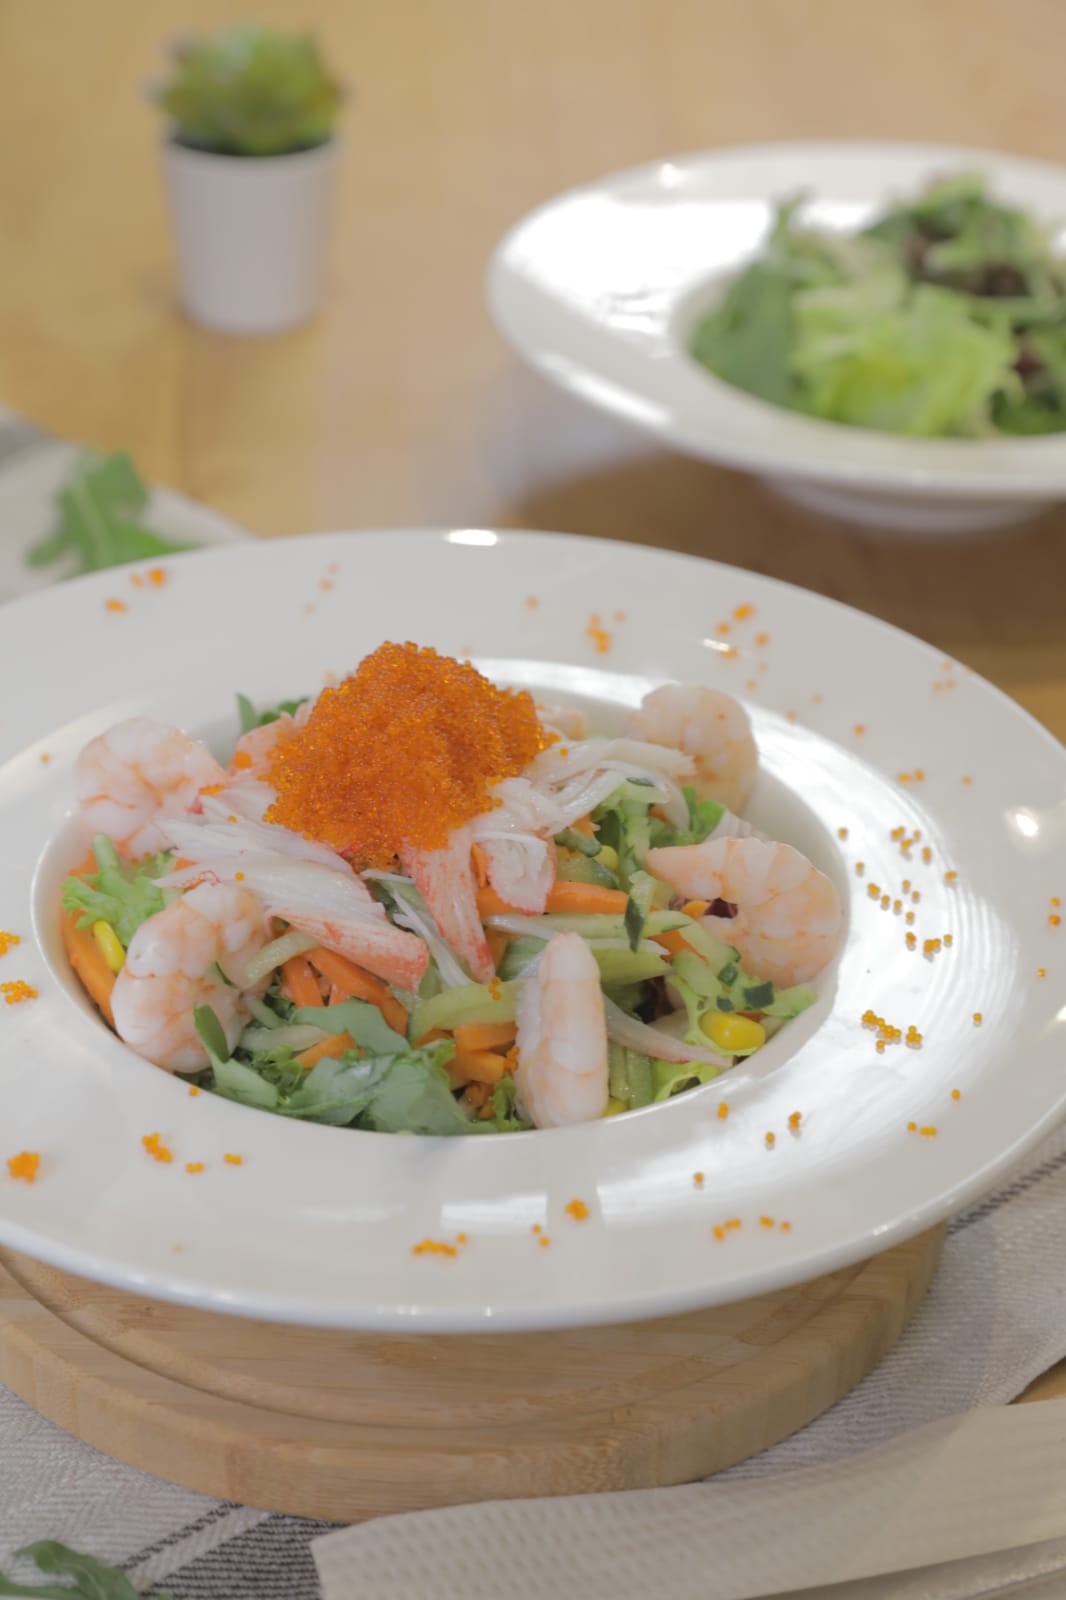 Shrimp, Crab willow and Crab roe salad, served with Wasabi sauce